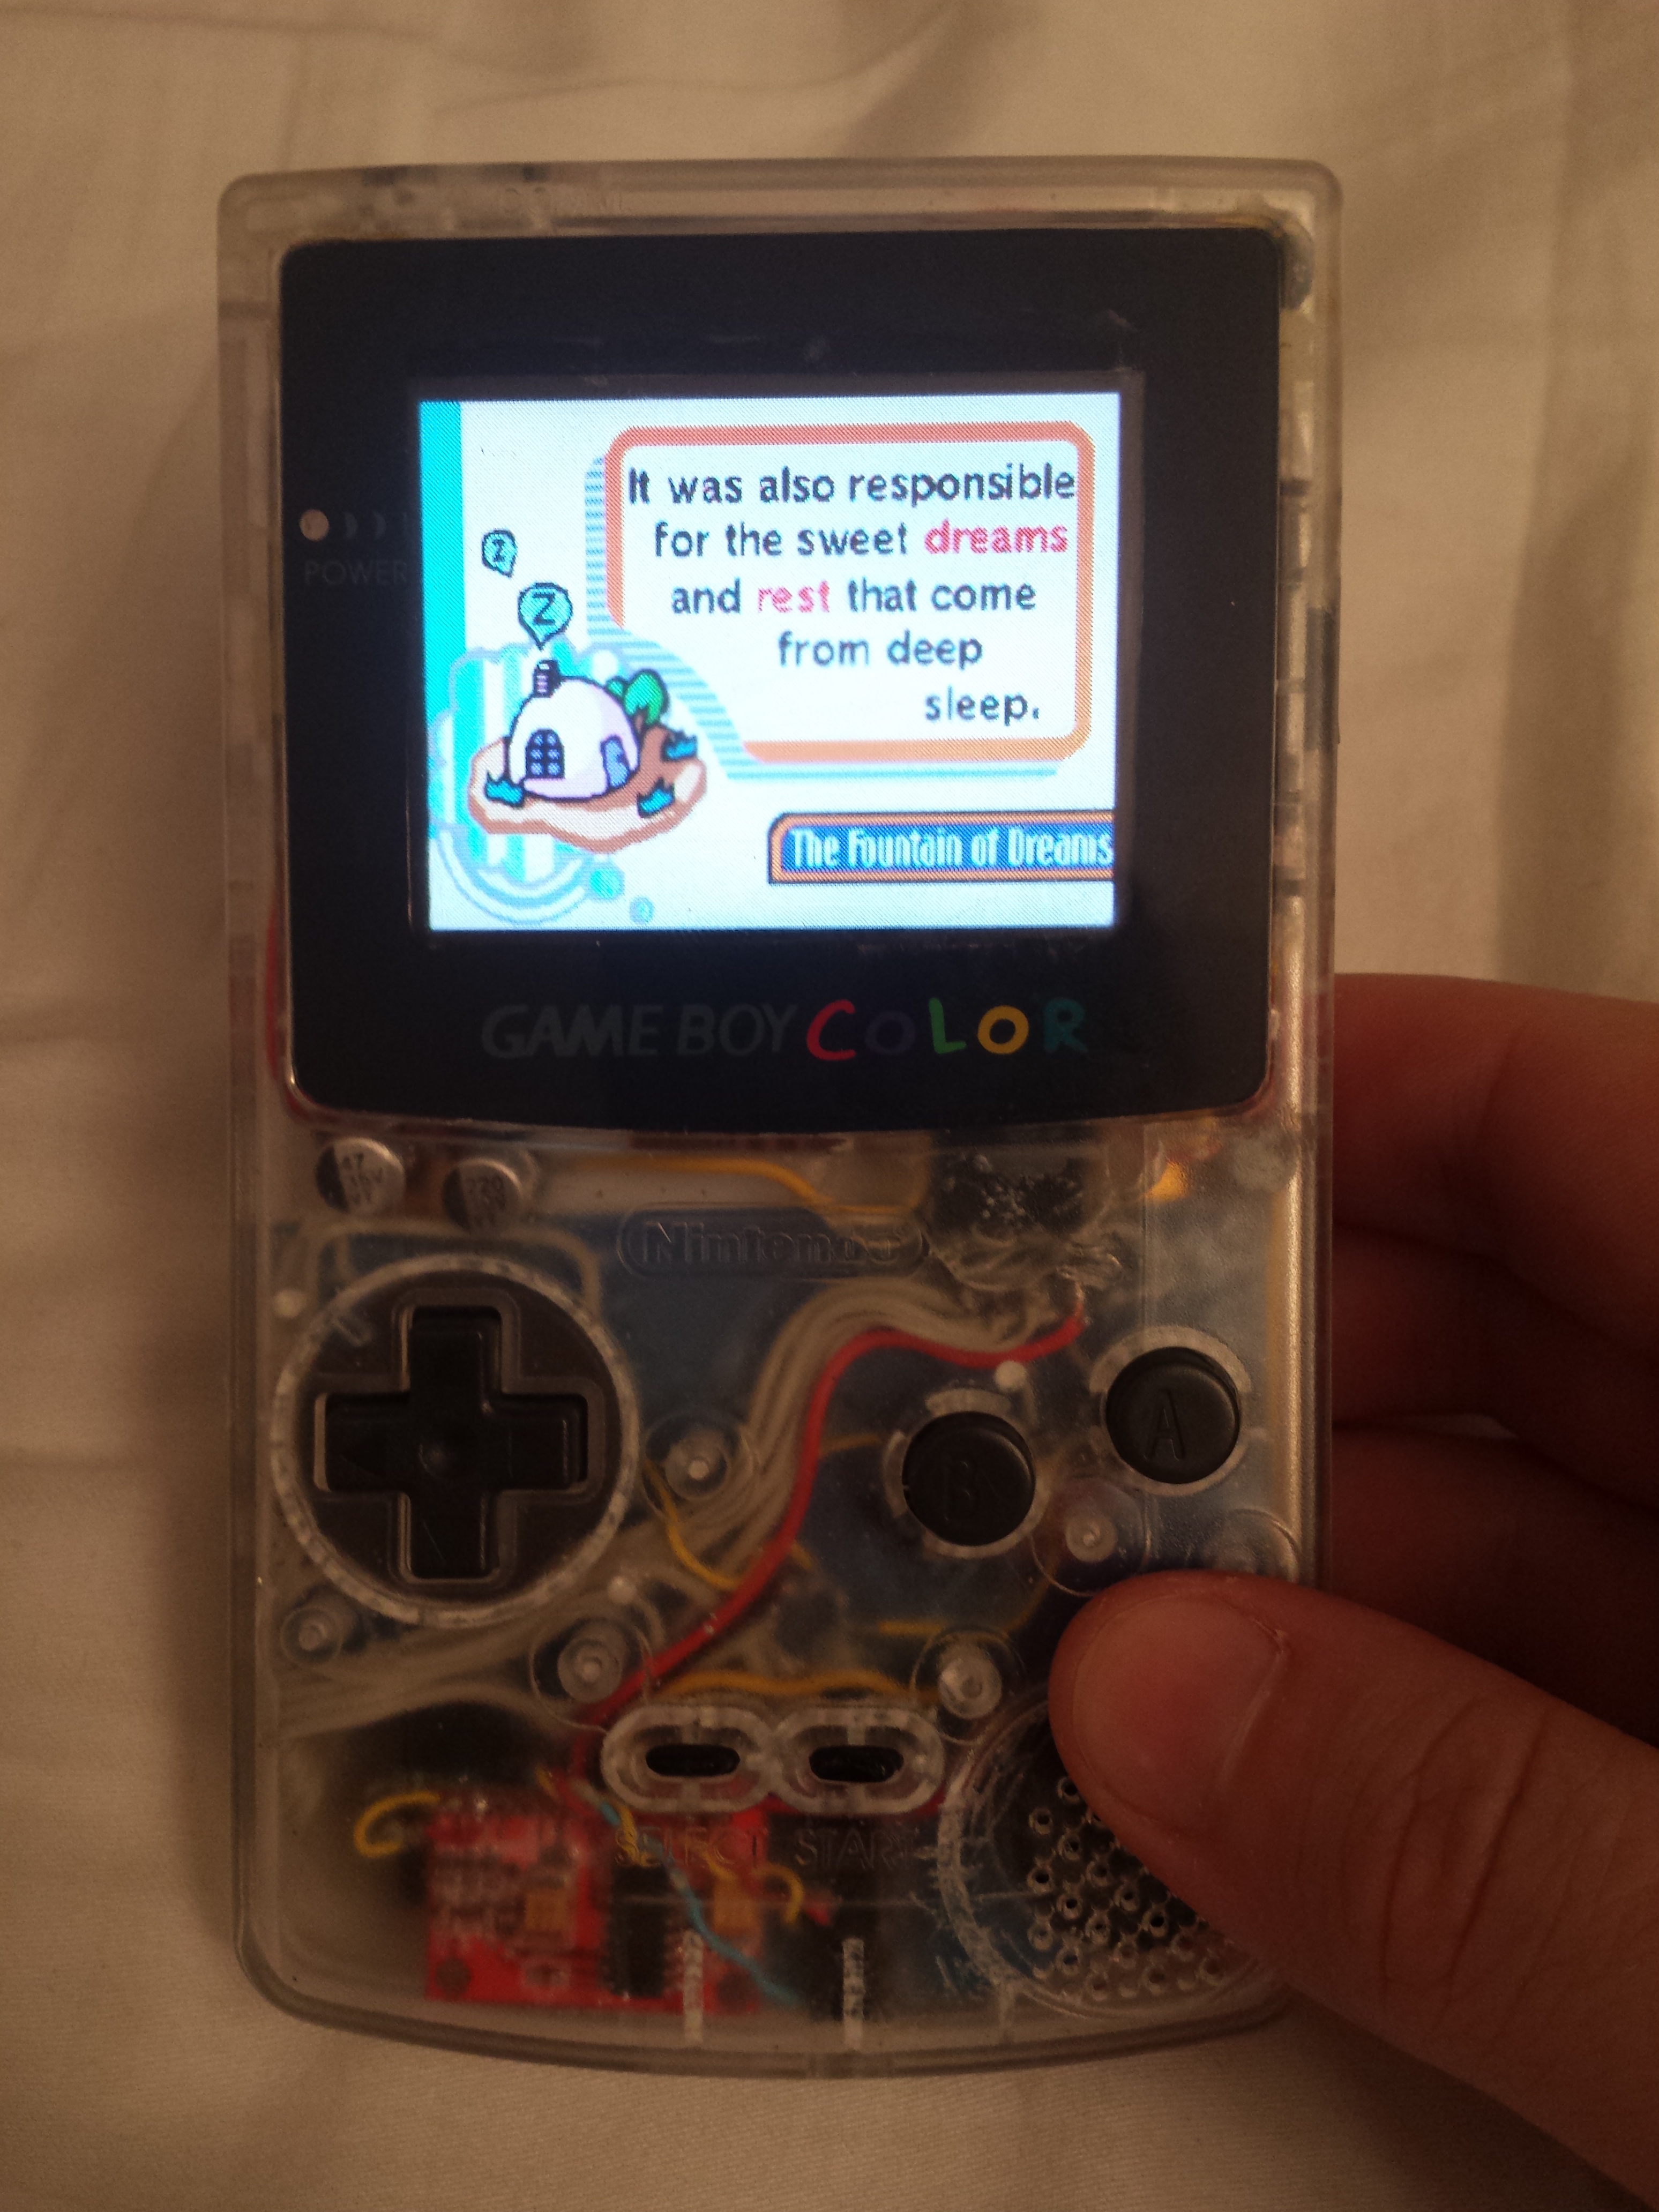 Preview of the yet incomplete Gameboy pi Color